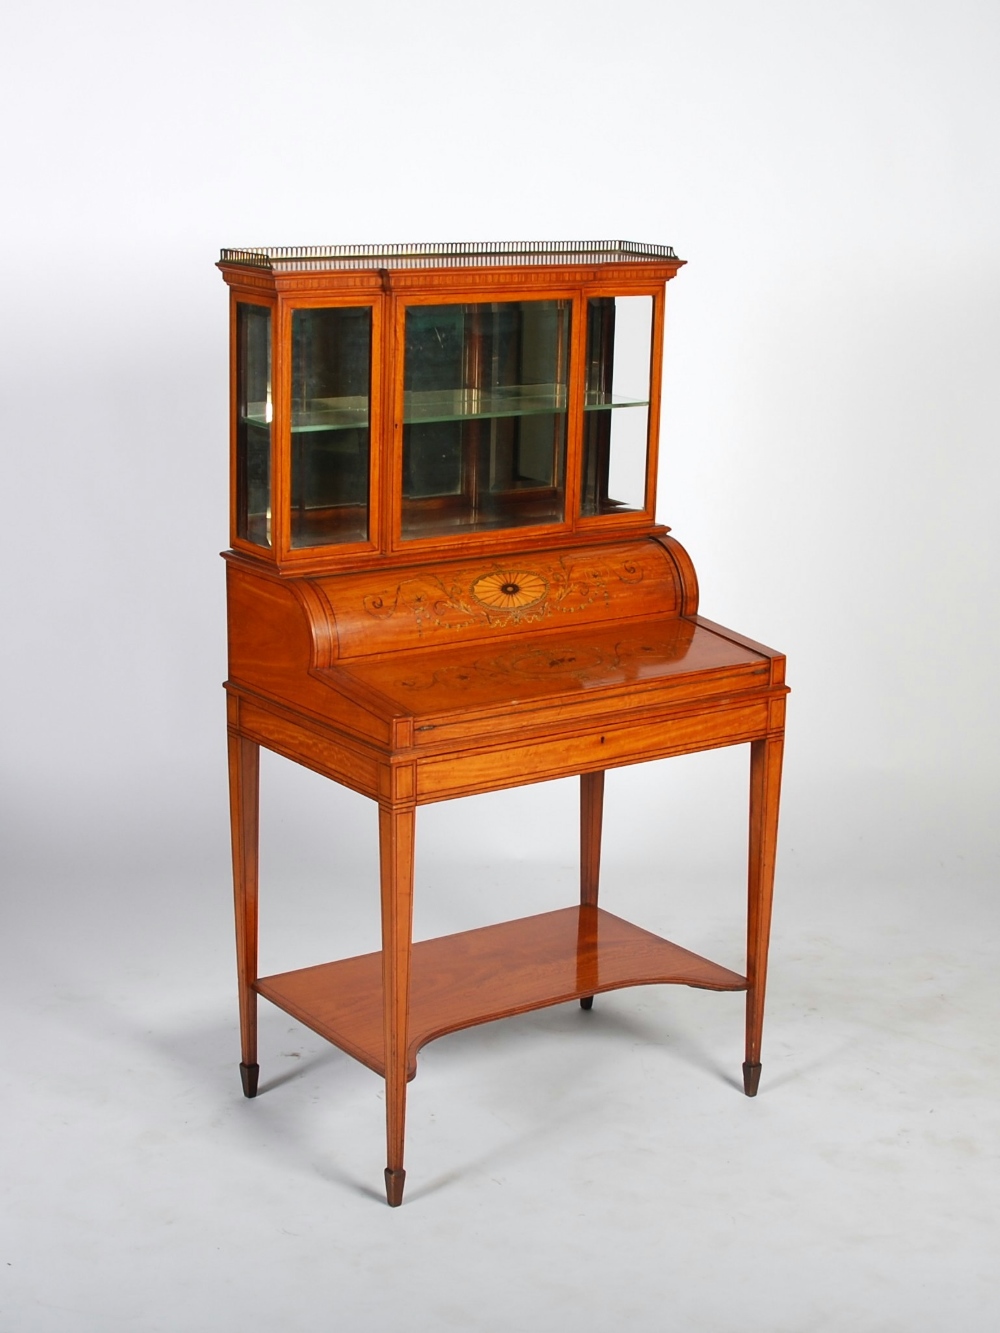 An Edwardian satinwood, marquetry and ebony lined writing desk, the upper section with a